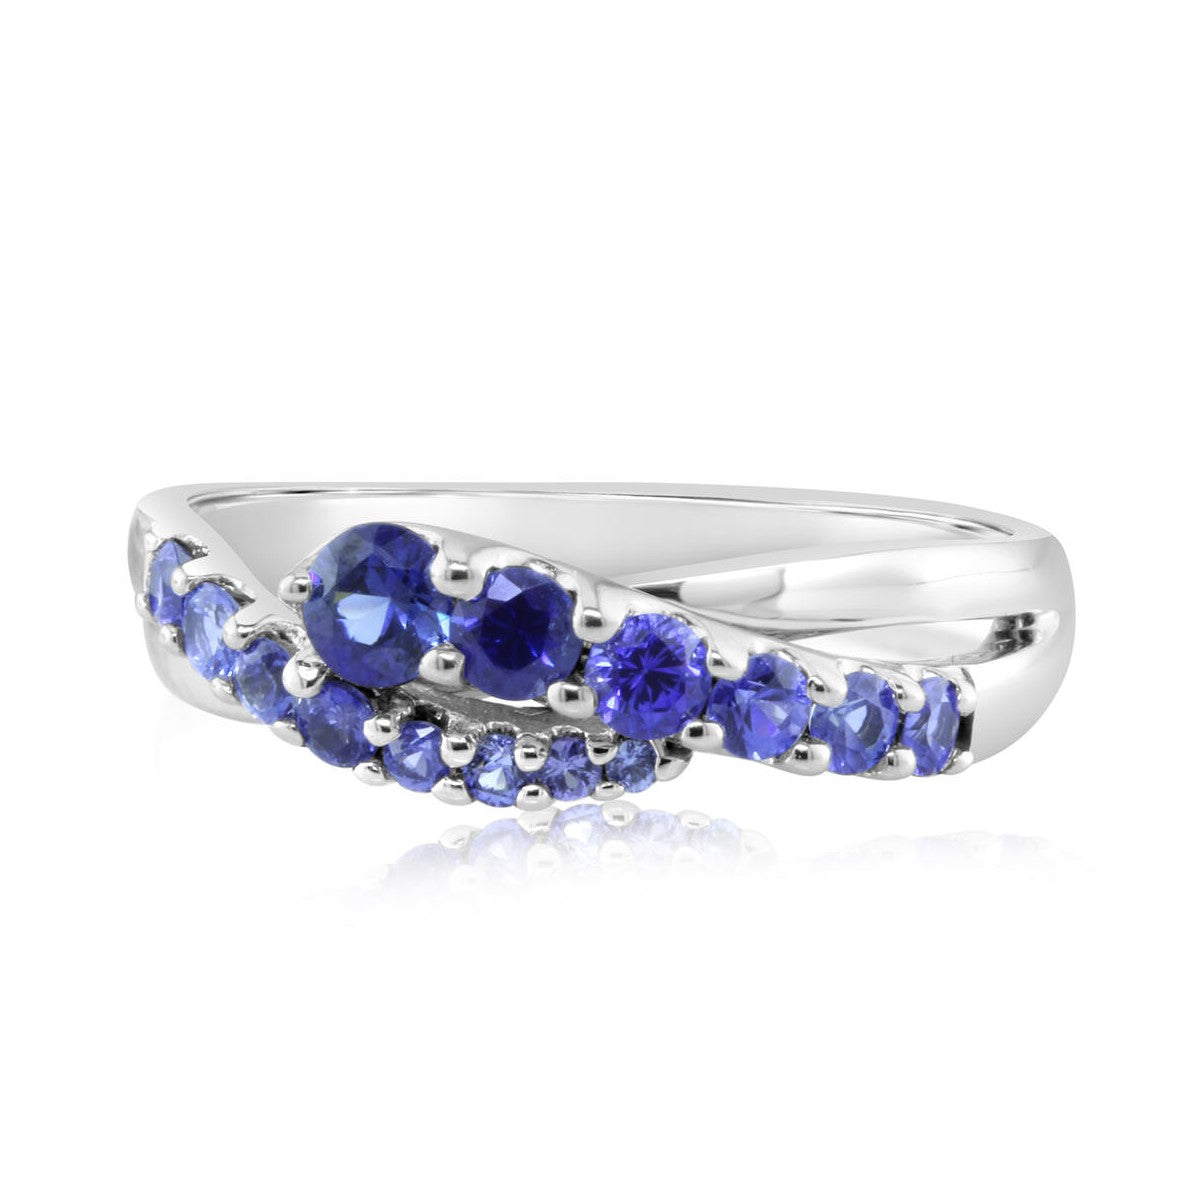 Parle 14 Karat White Gold Sapphires Ombre' Twist Ring R325GUGS1W1